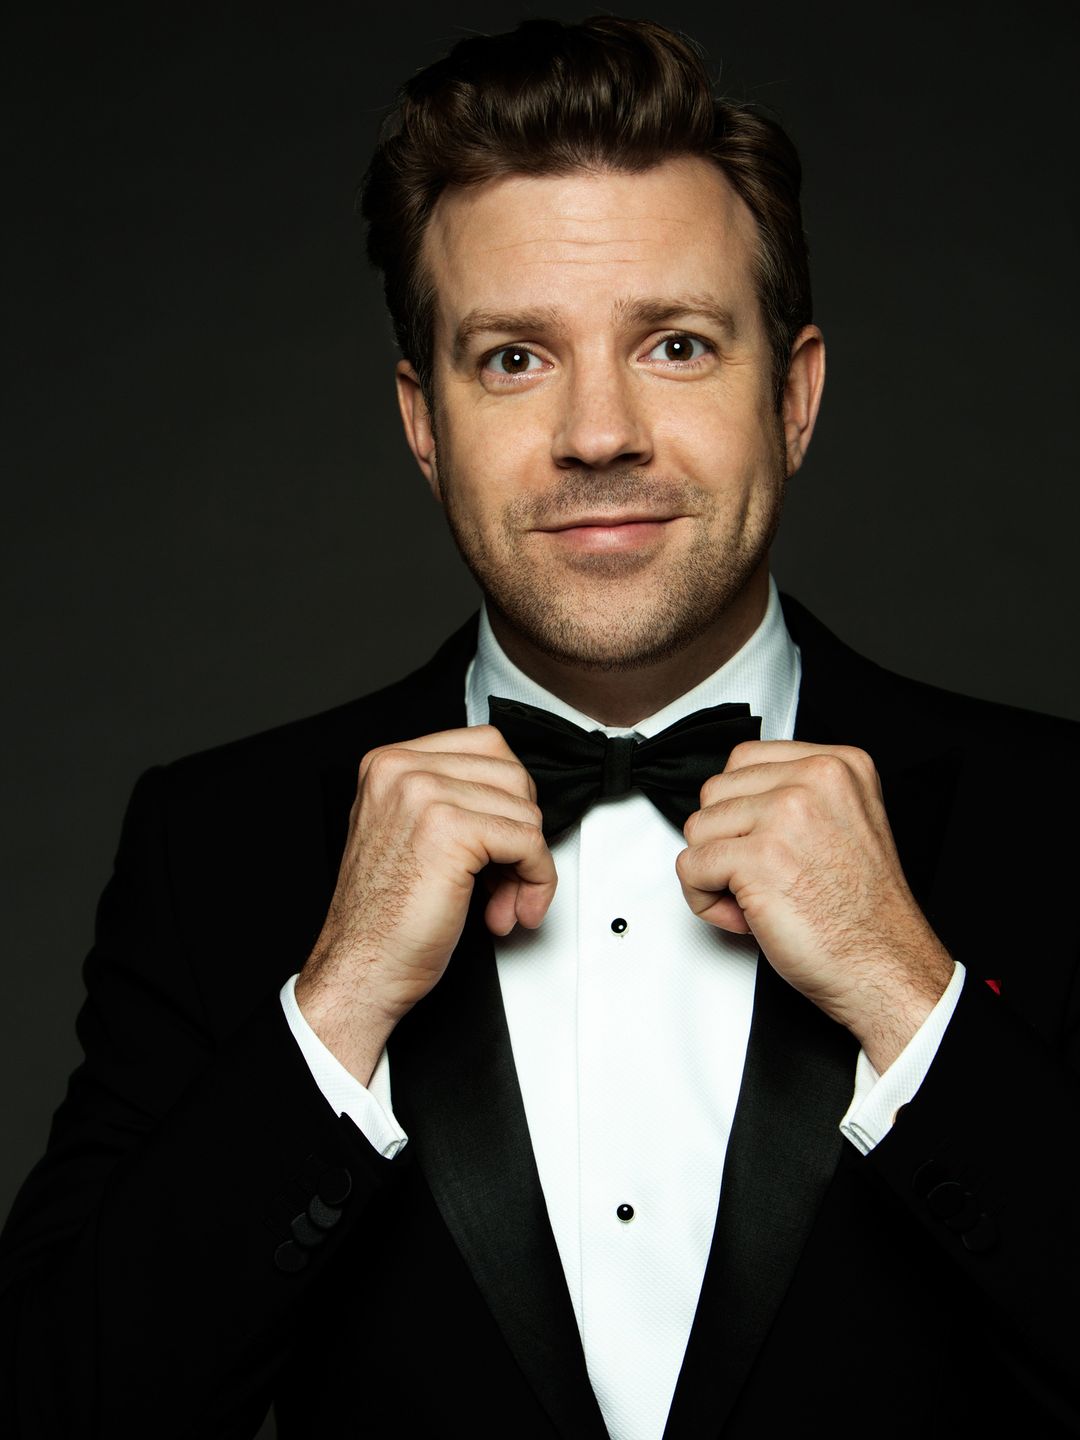 Jason Sudeikis how did he became famous